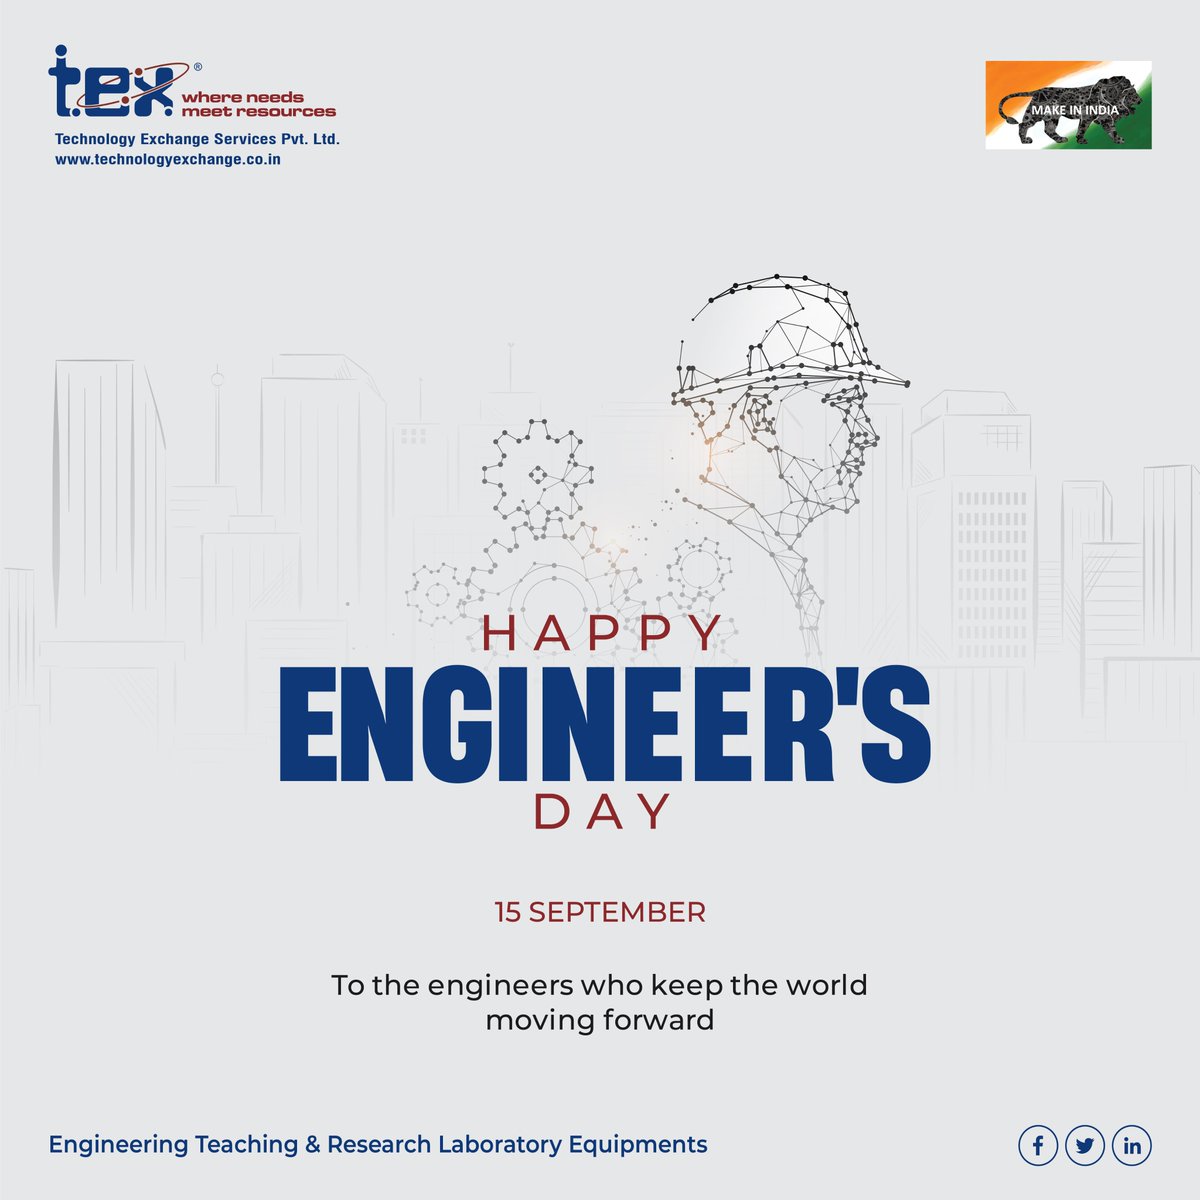 ✨ Happy Engineer's Day ✨
📌  Today, we celebrate the brilliant minds who engineer a brighter future. 
#engineersday #engineersday2023 #engineeringexcellence #engineeringsolutions #engineeringskills #customizedproducts #manufacturingquality #tex #technologyexchangeservices